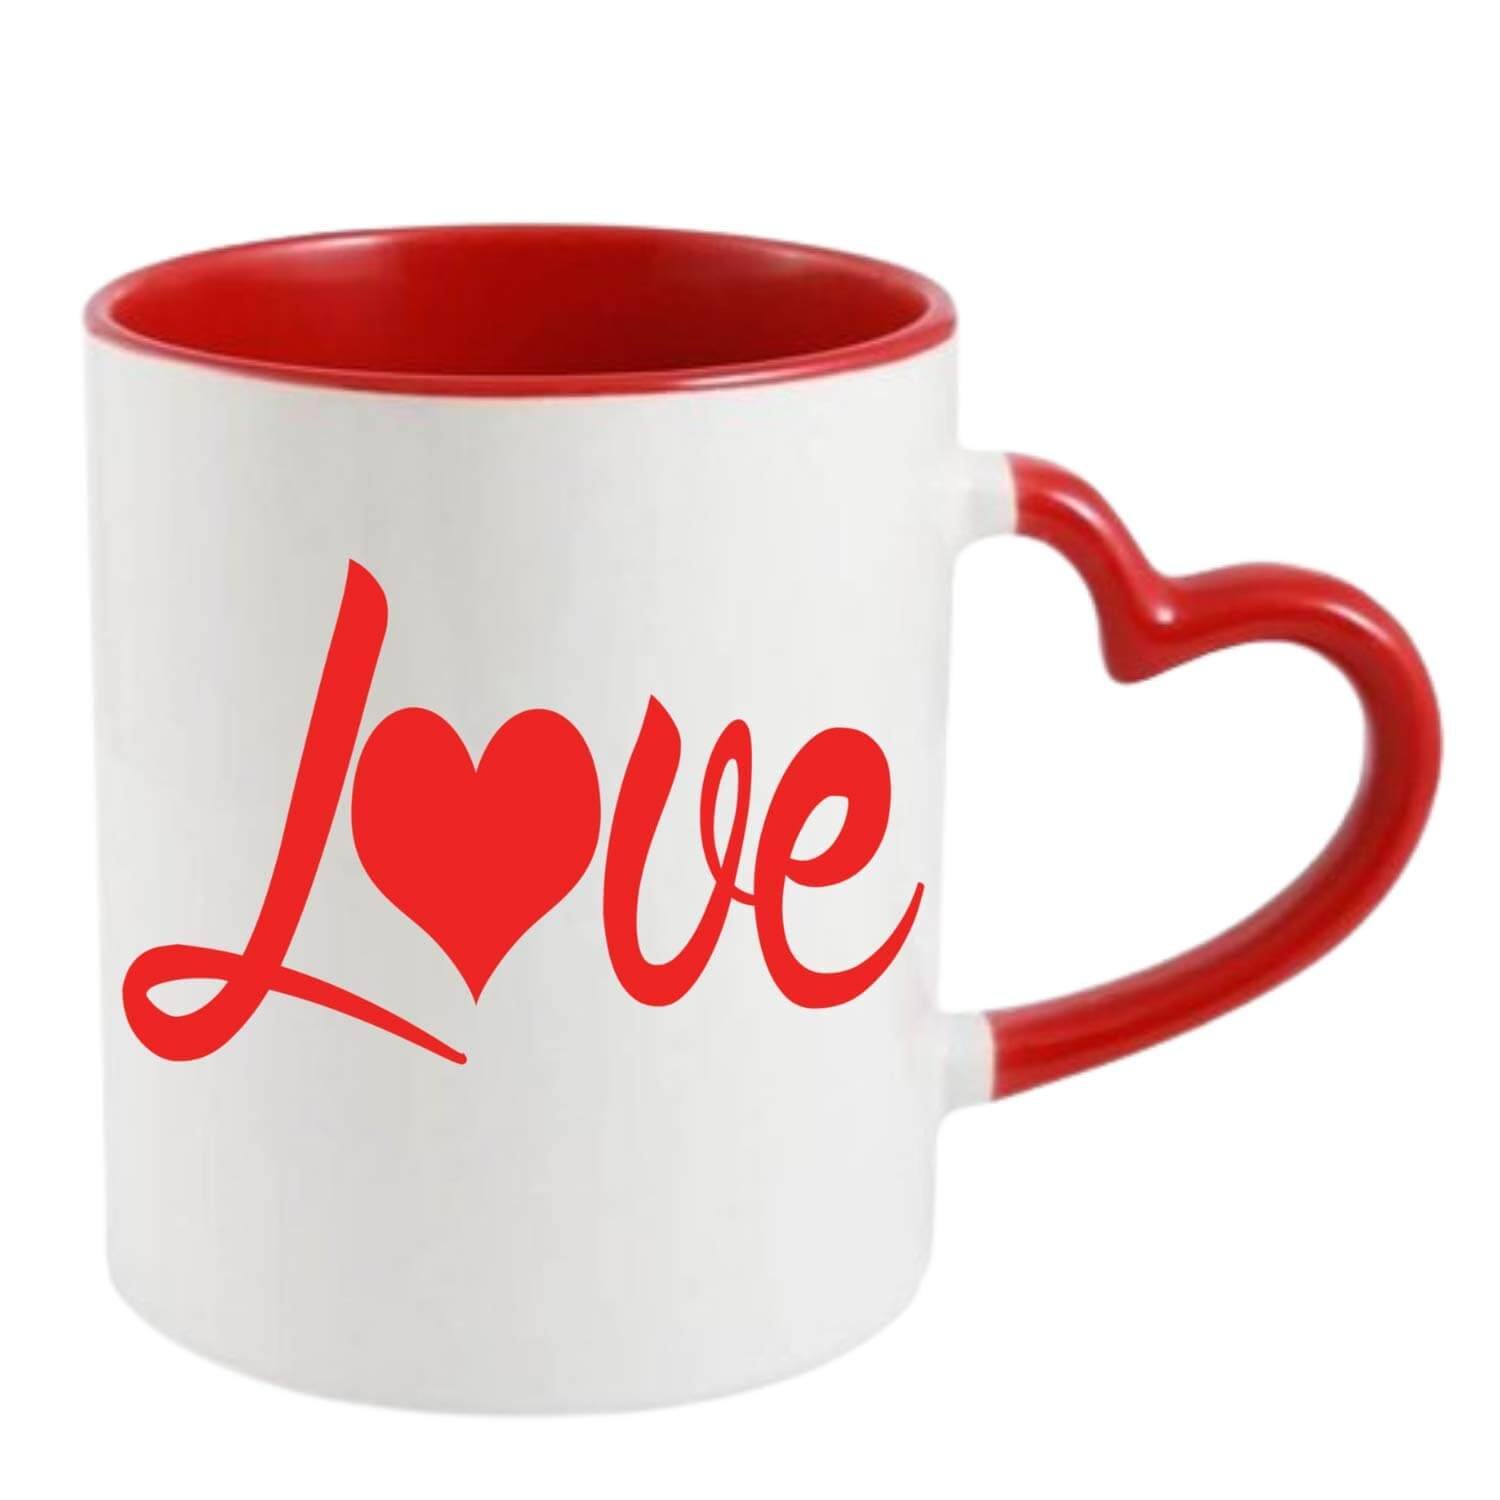 https://shoppingyatra.com/product_images/The Magic Click Ceramic Customized Coffee Mug Best Gift Whit Personalised Photo for Valentine Day3.jpg